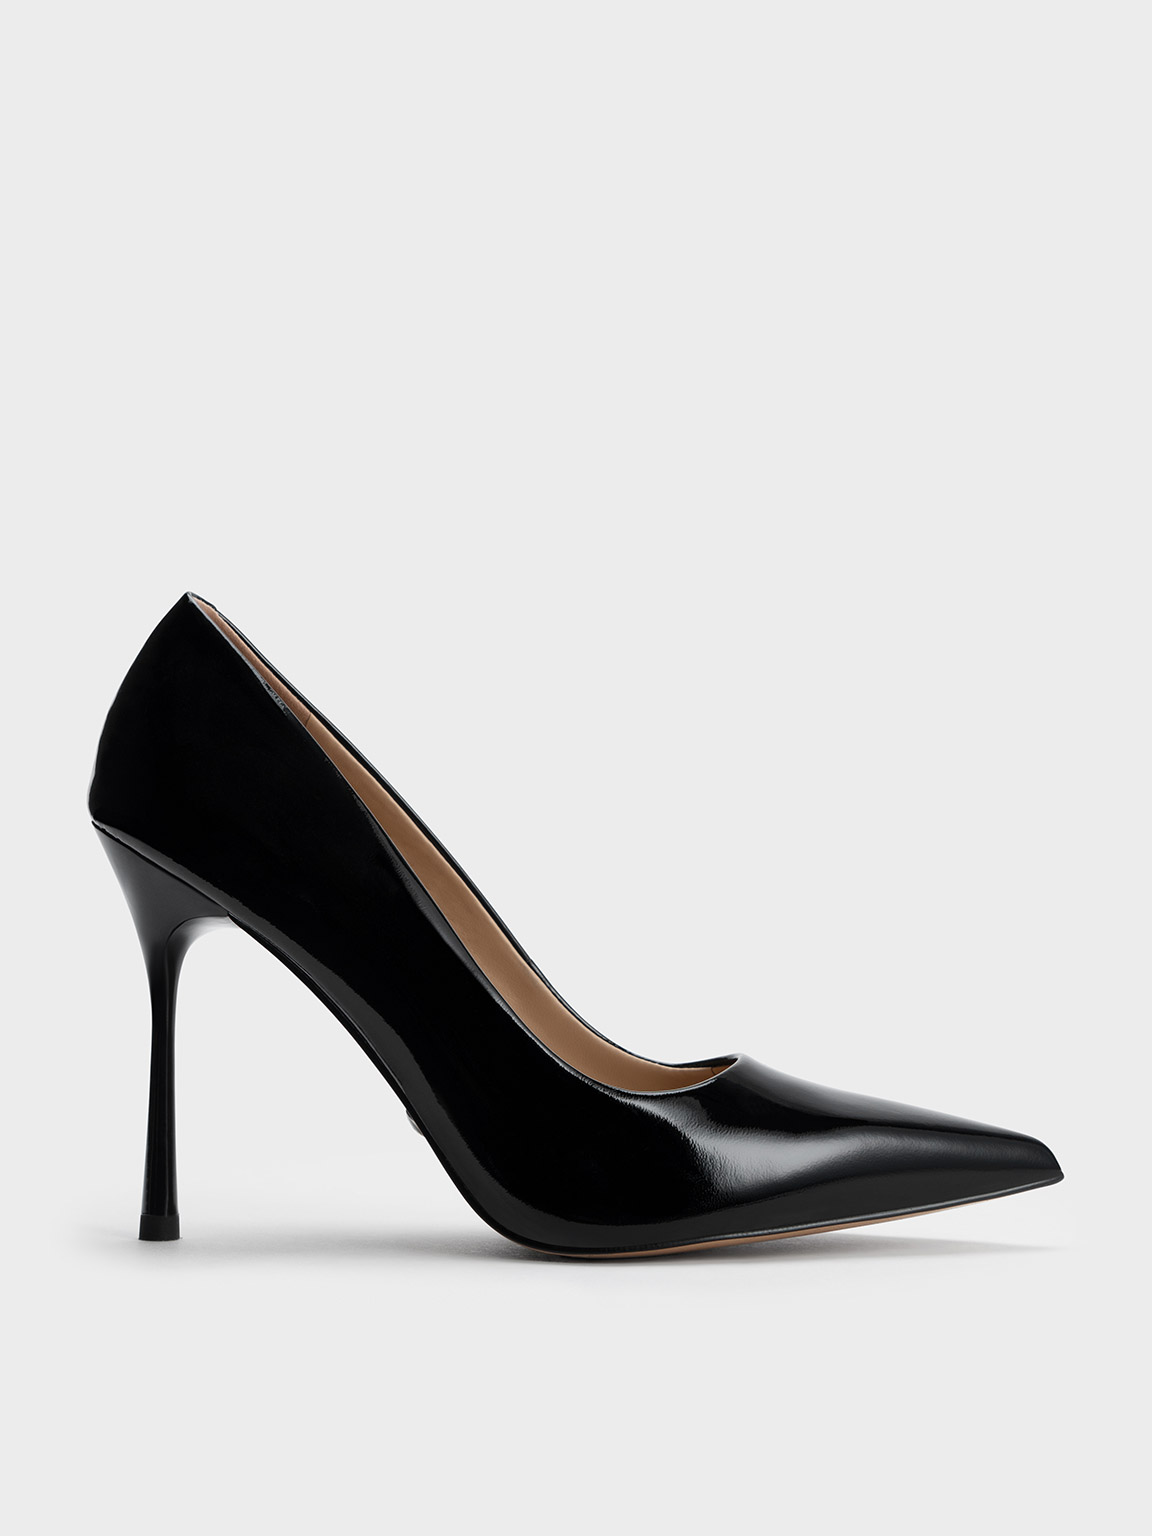 Charles & Keith Kyra Patent Leather Pumps In Black Patent